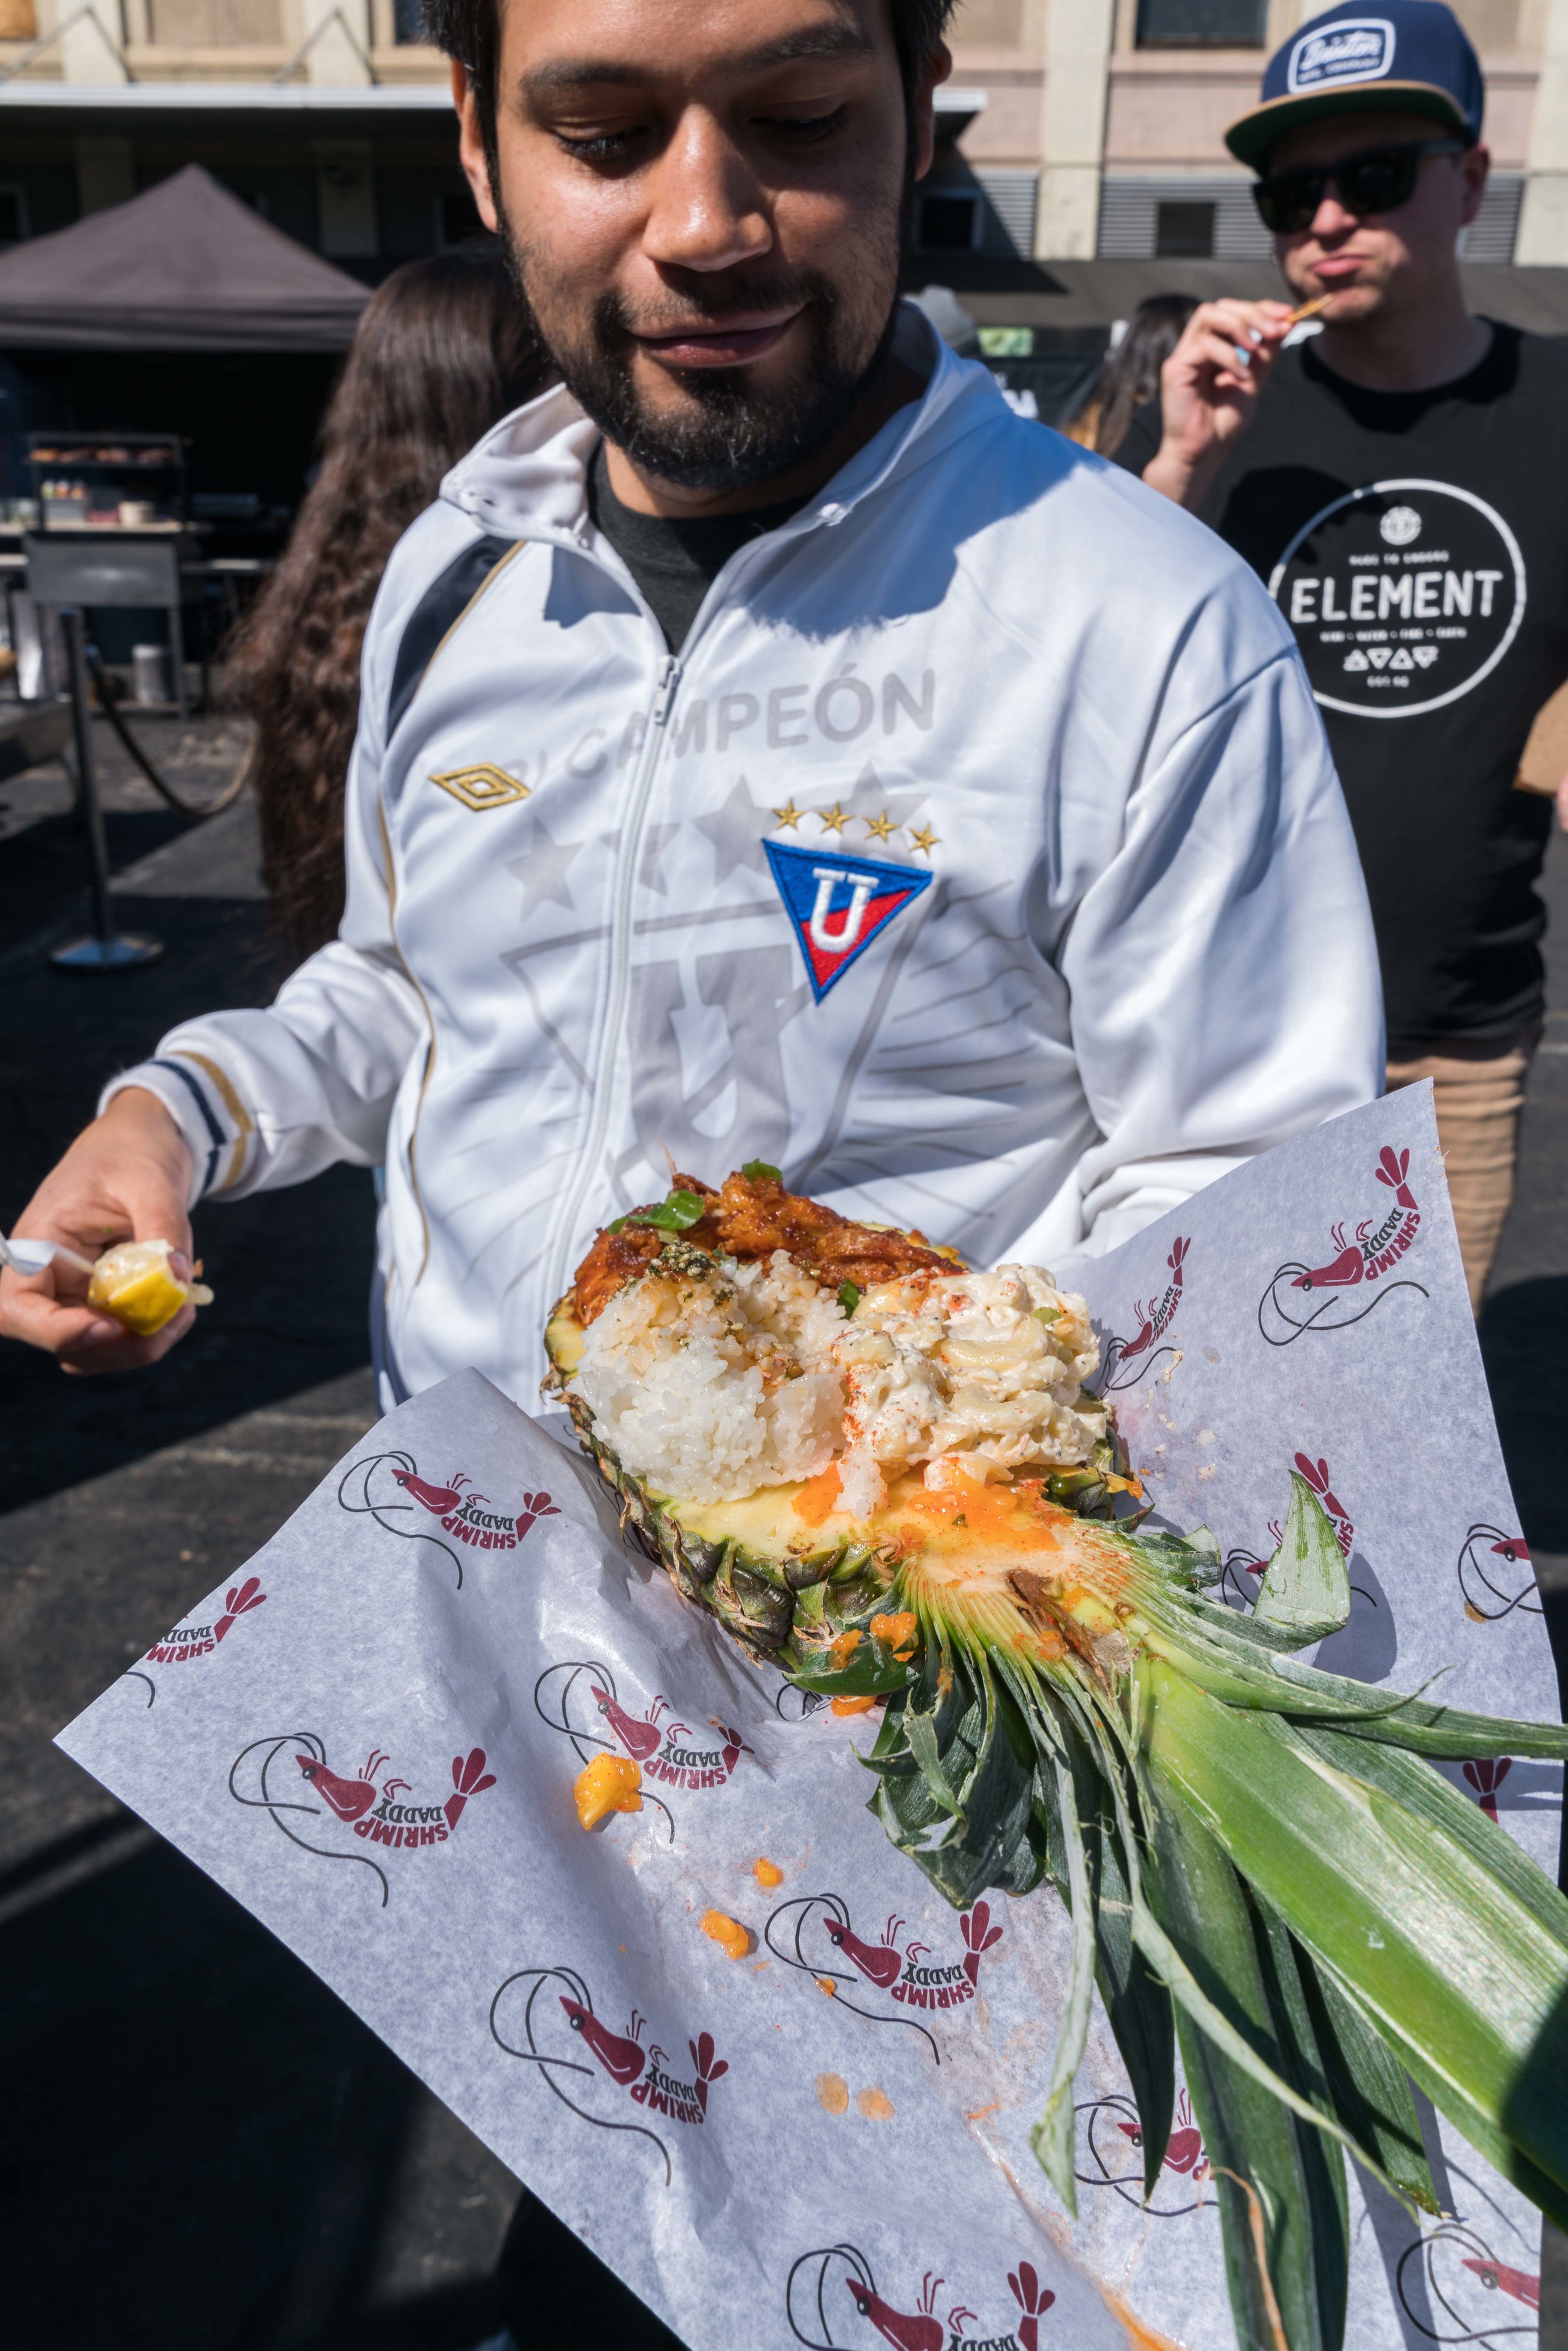  Gustavo Ordonaz eats Hawaiian-style garlic butter shrimp from Shrimp Daddy at Smorgasburg LA on Sunday, February 25, 2018 in the downtown section of Los Angeles, Calif. Smorgasburg LA is a collection of food and retail vendors that take place on Sun